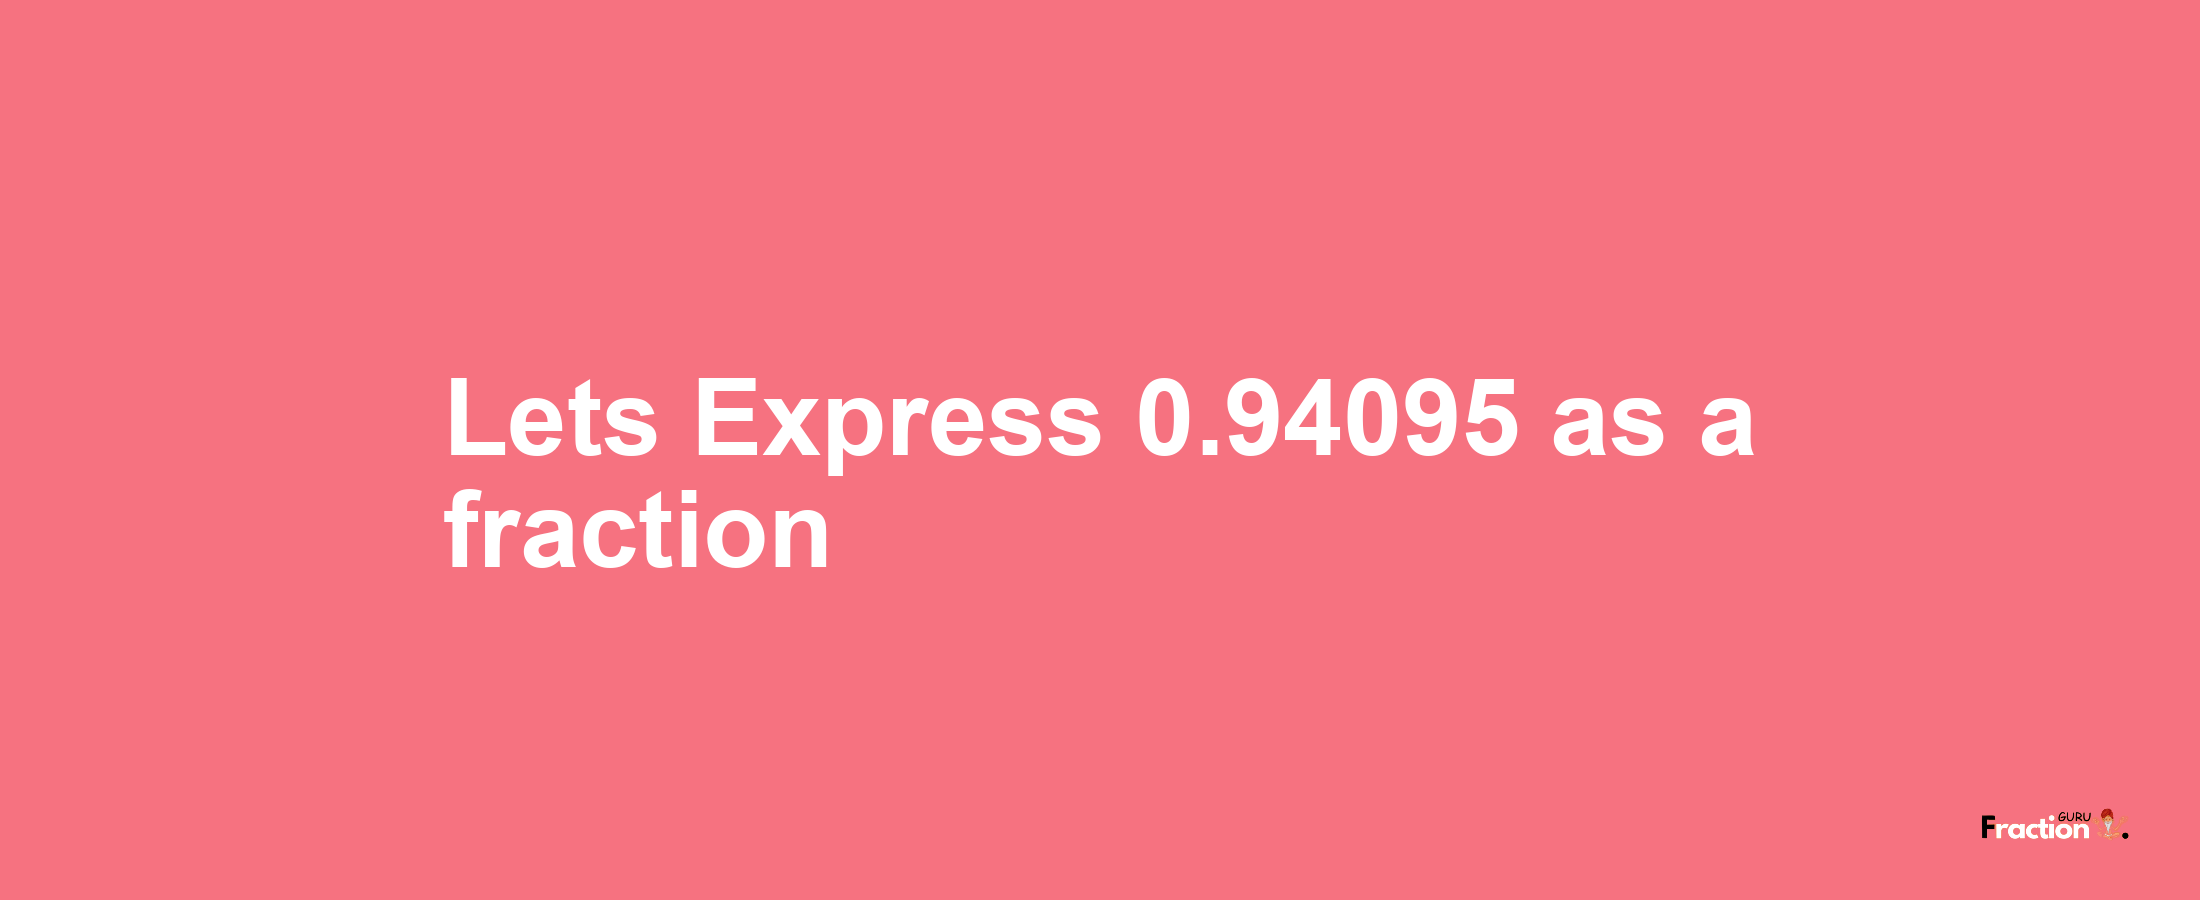 Lets Express 0.94095 as afraction